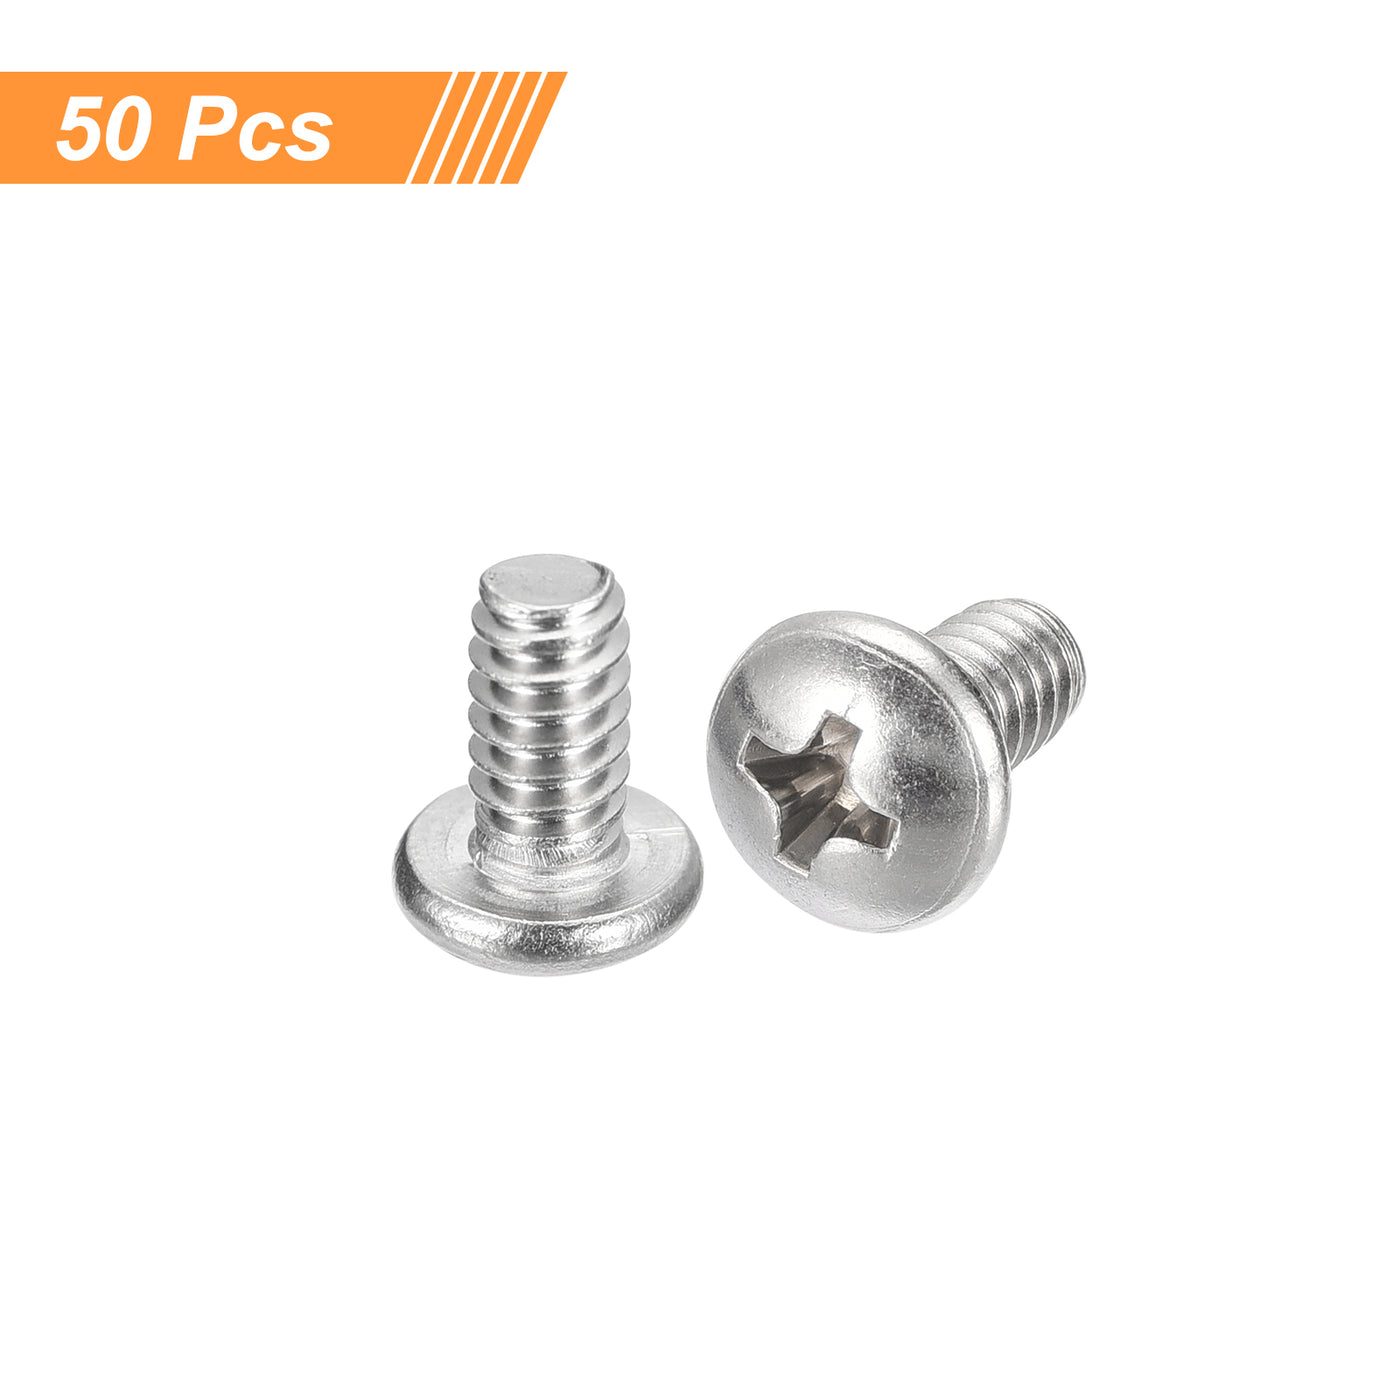 uxcell Uxcell #10-24x3/8" Pan Head Machine Screws, Stainless Steel 18-8 Screw, Pack of 50